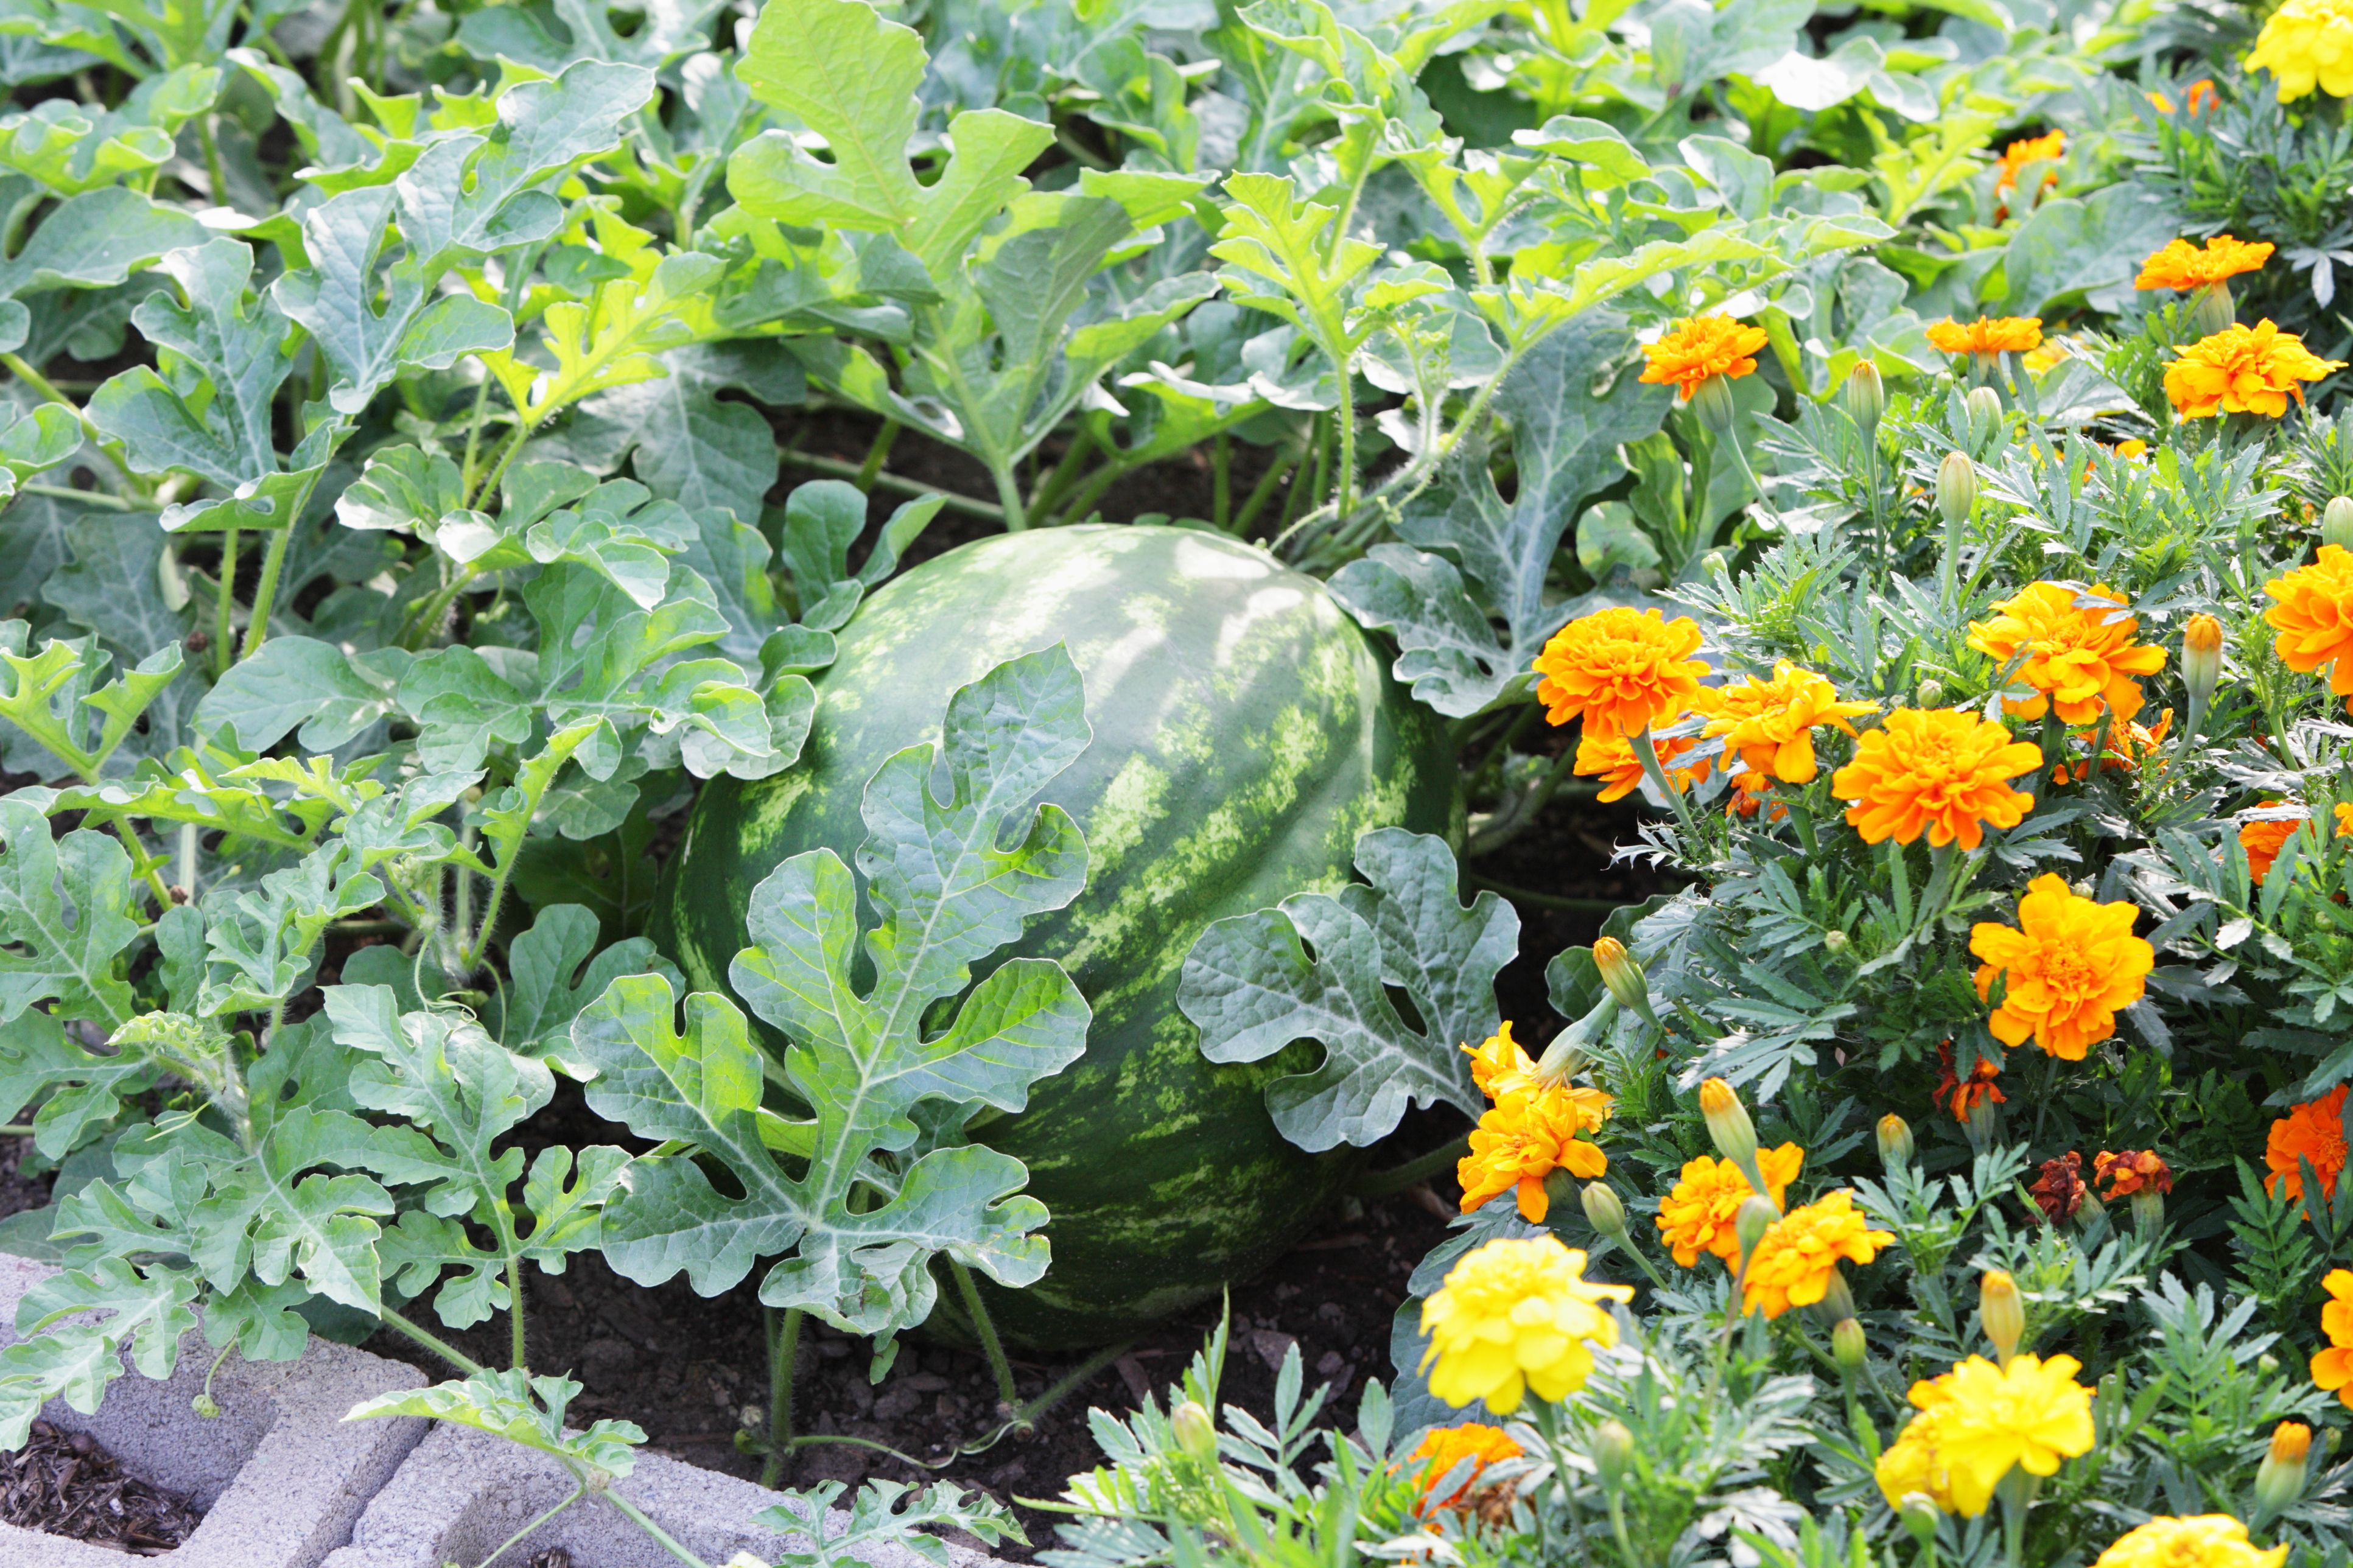 Image of Marigolds as companion plants for melons